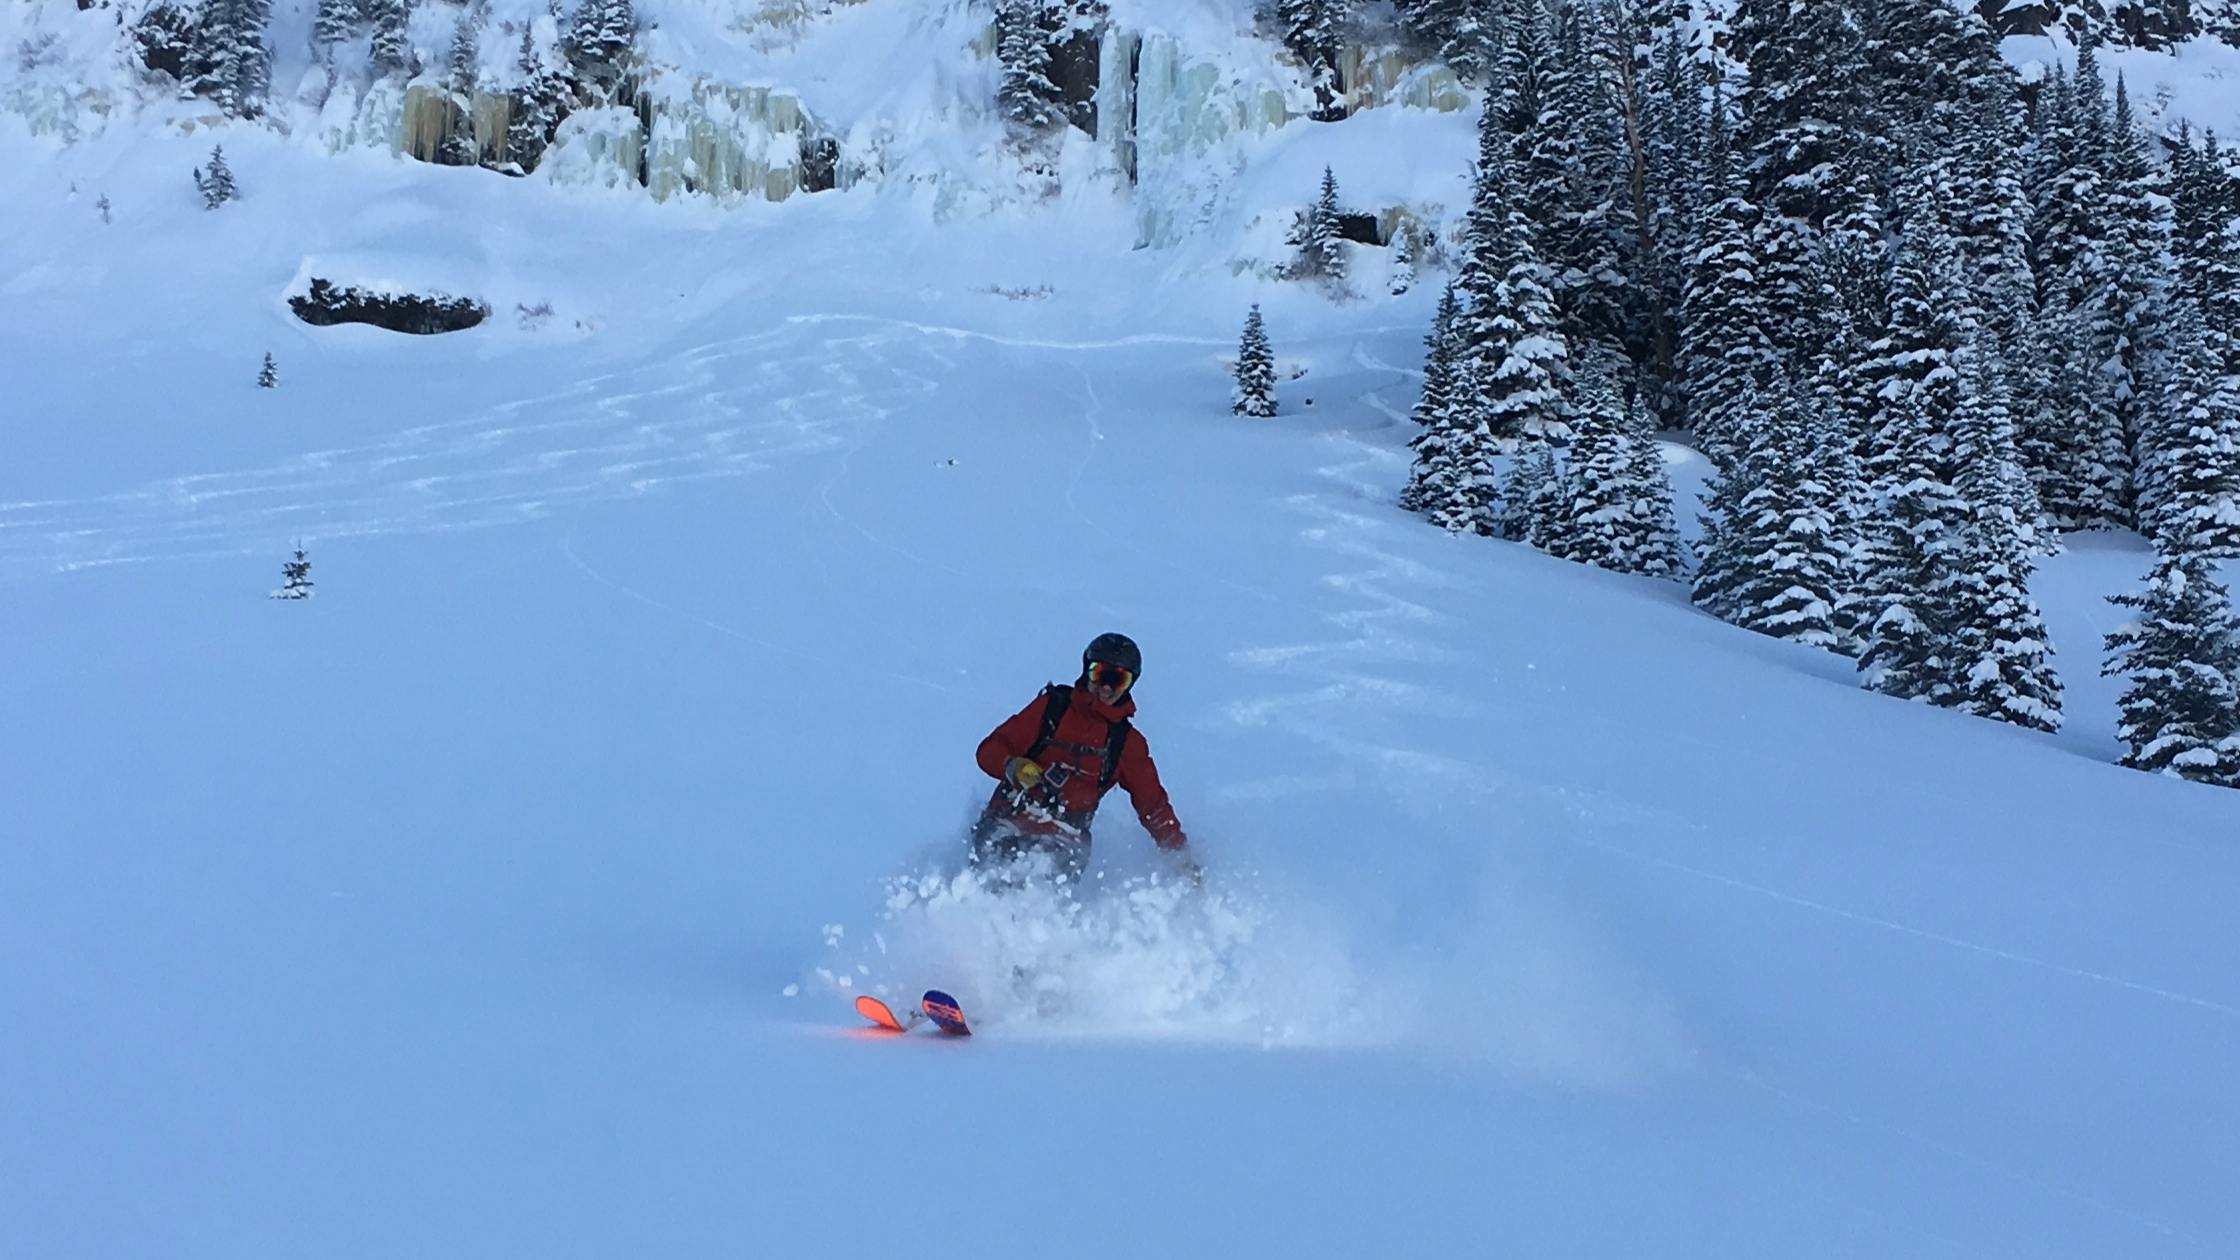 A skier gliding down a slope blanketed with powder snow